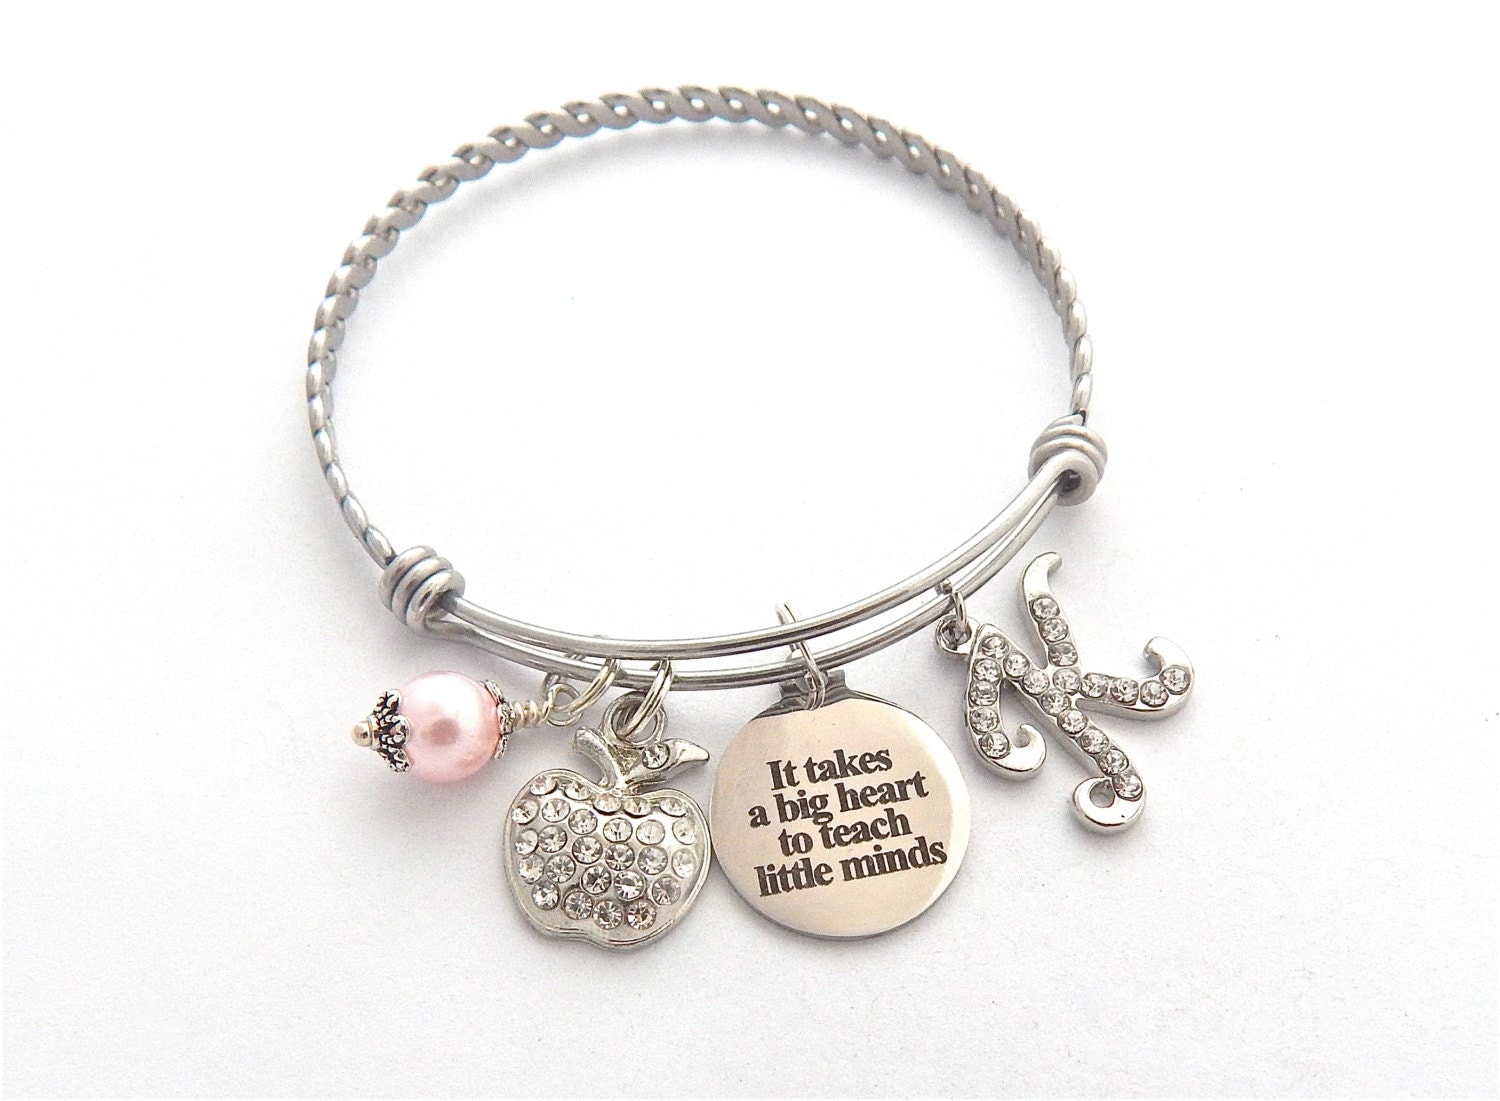 Personalized TEACHER Gift, teacher bracelet, Gifts for Teachers Appreciation, It takes a big heart to teach little minds, End of year gift